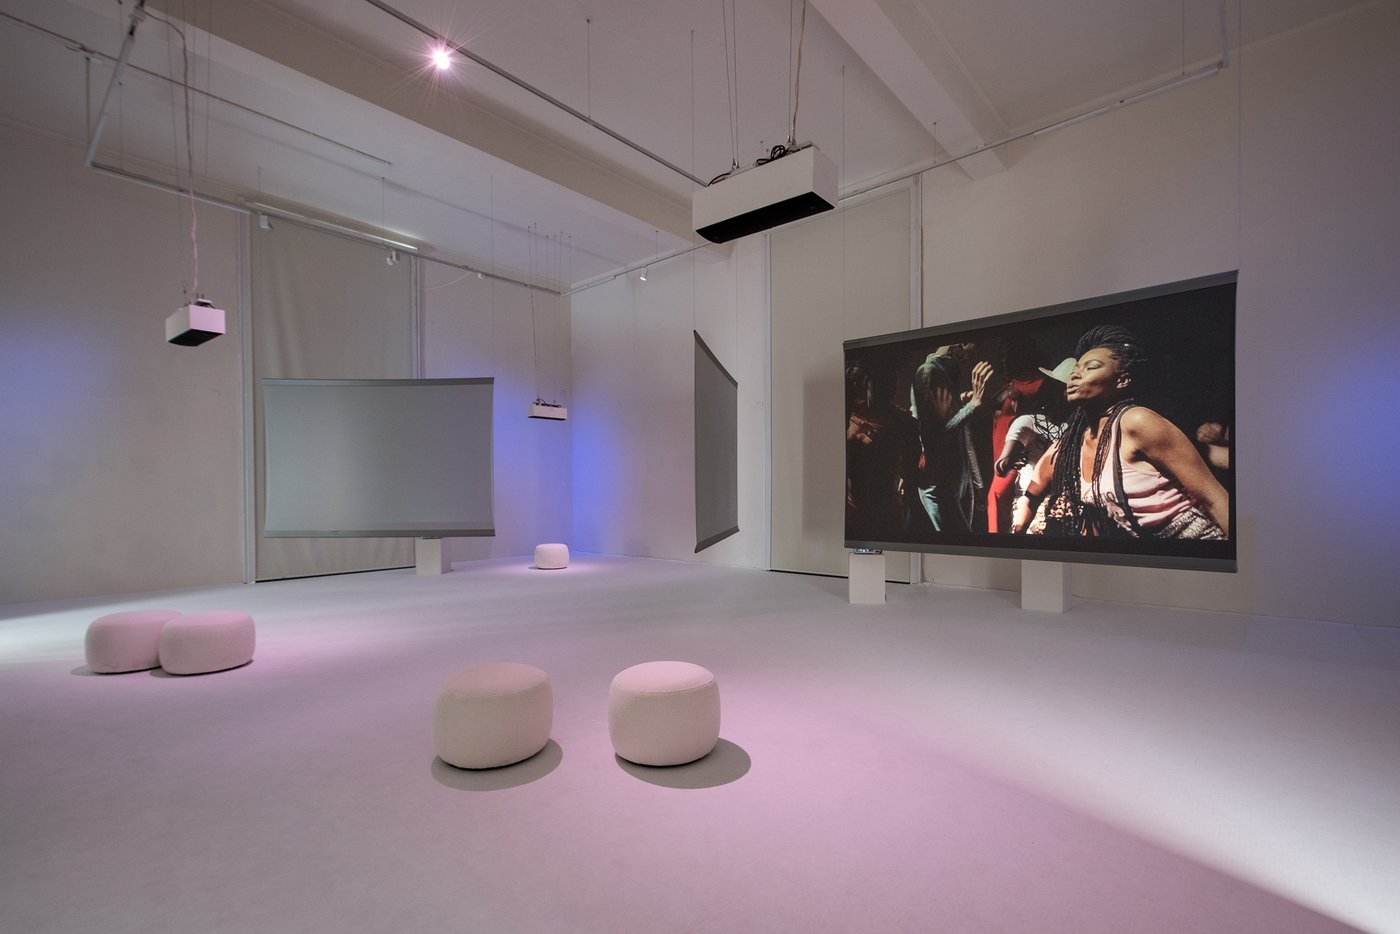 white room with white round stools, in the background several screens hanging on wires, on one screen a film with a black woman in the picture is projected